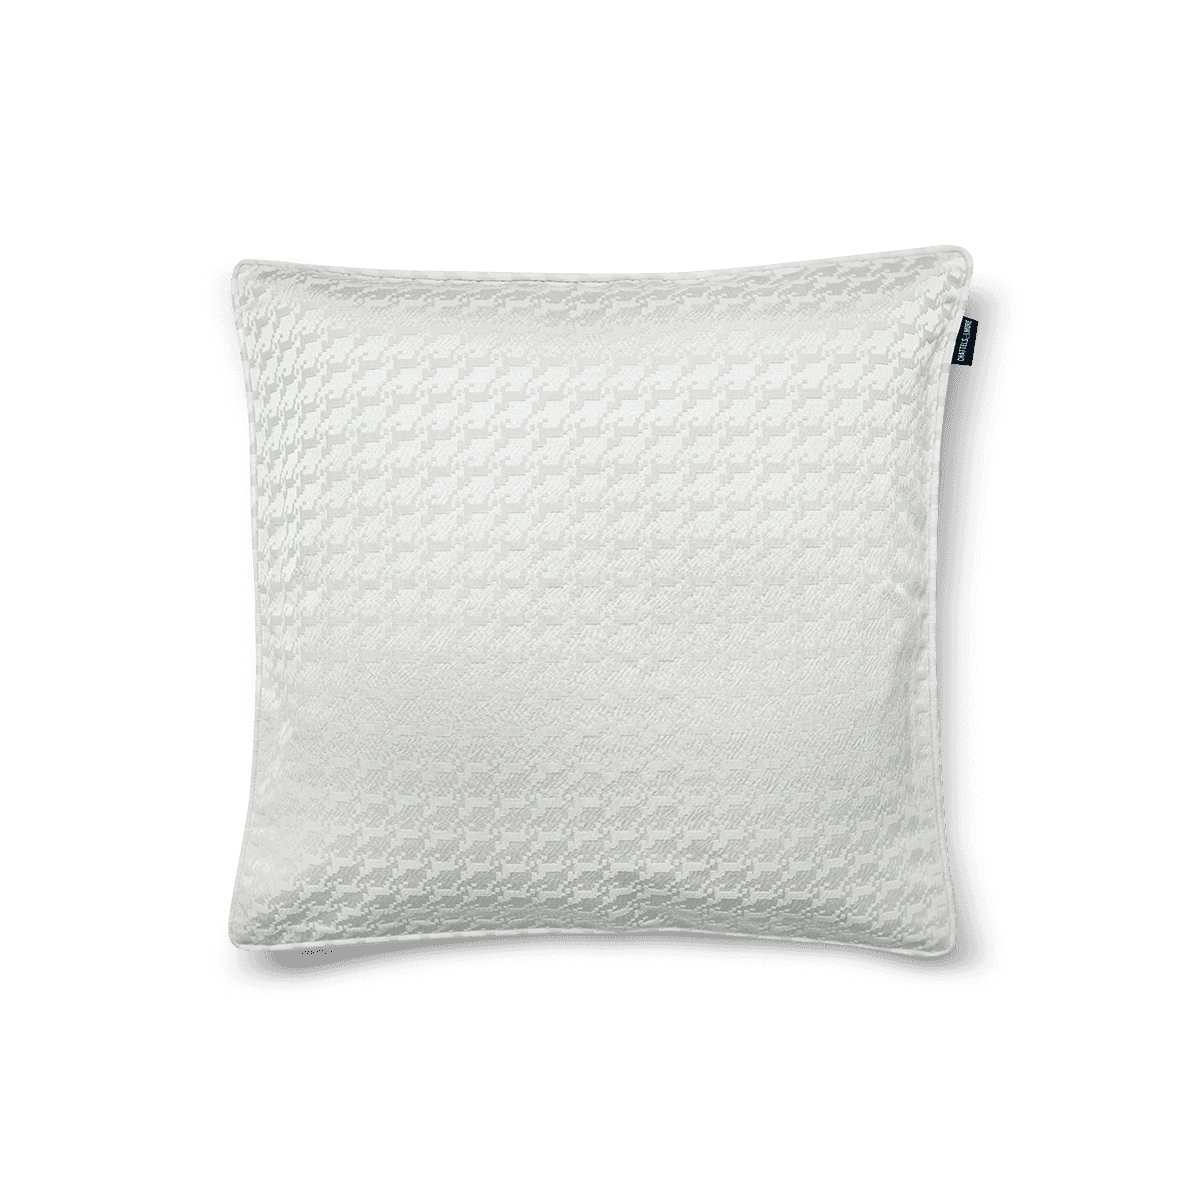 Cushion Marshall Bianca with Filler, White